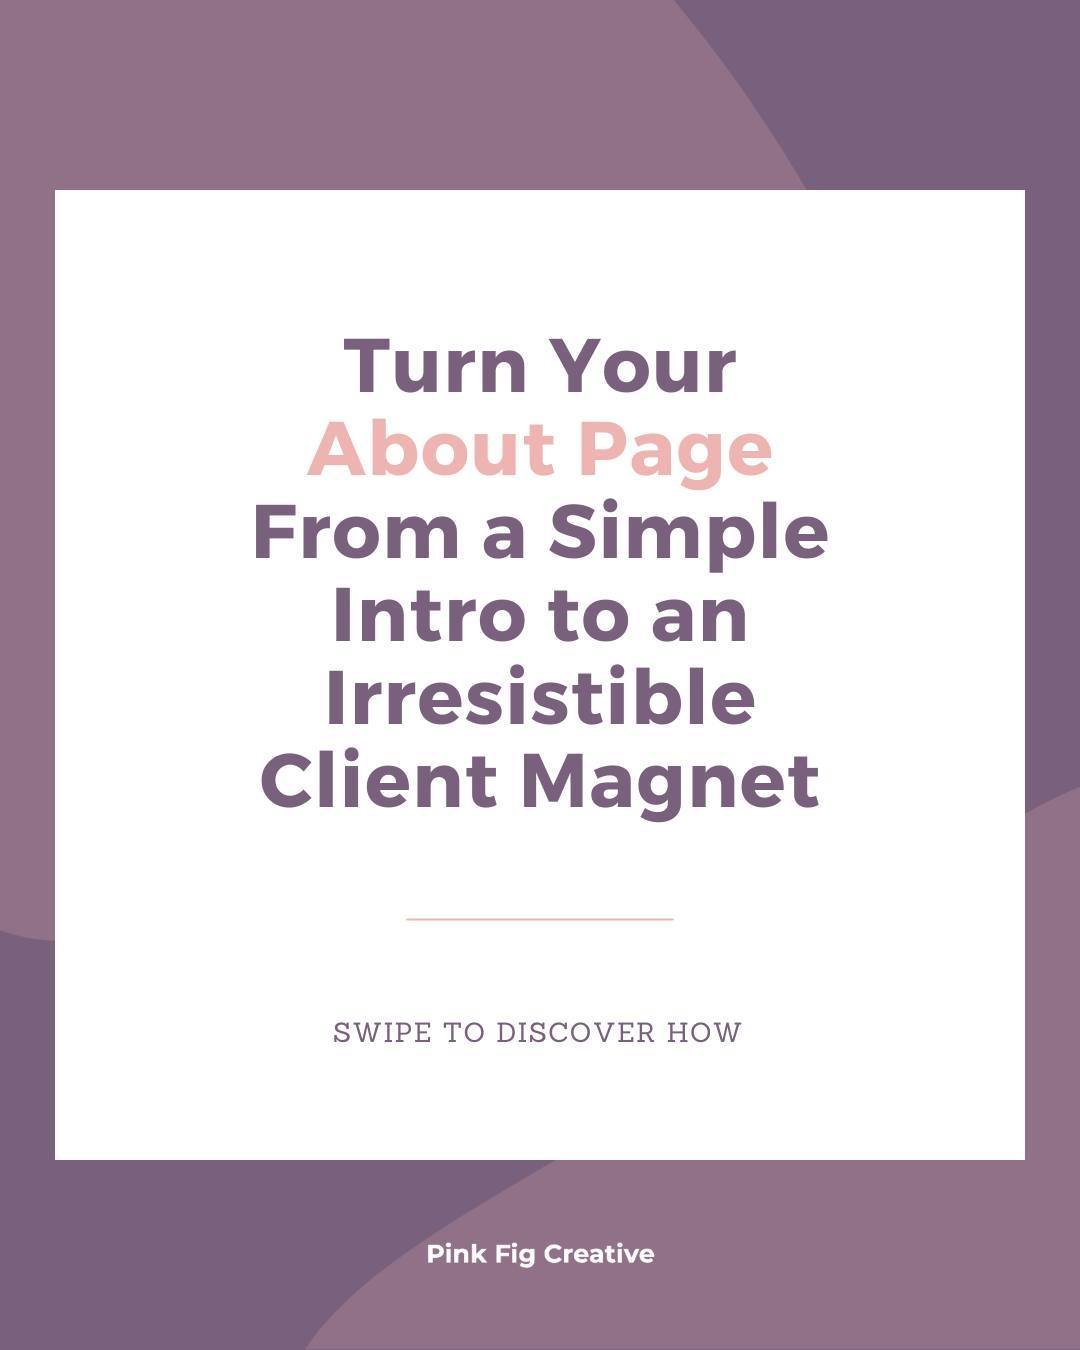 Ready to turn your About Page from a simple intro to an irresistible client magnet?  Dive into our latest carousel to discover the 4 key elements that make your story sparkle and your team shine. From heartfelt stories to design that dazzles, we've g